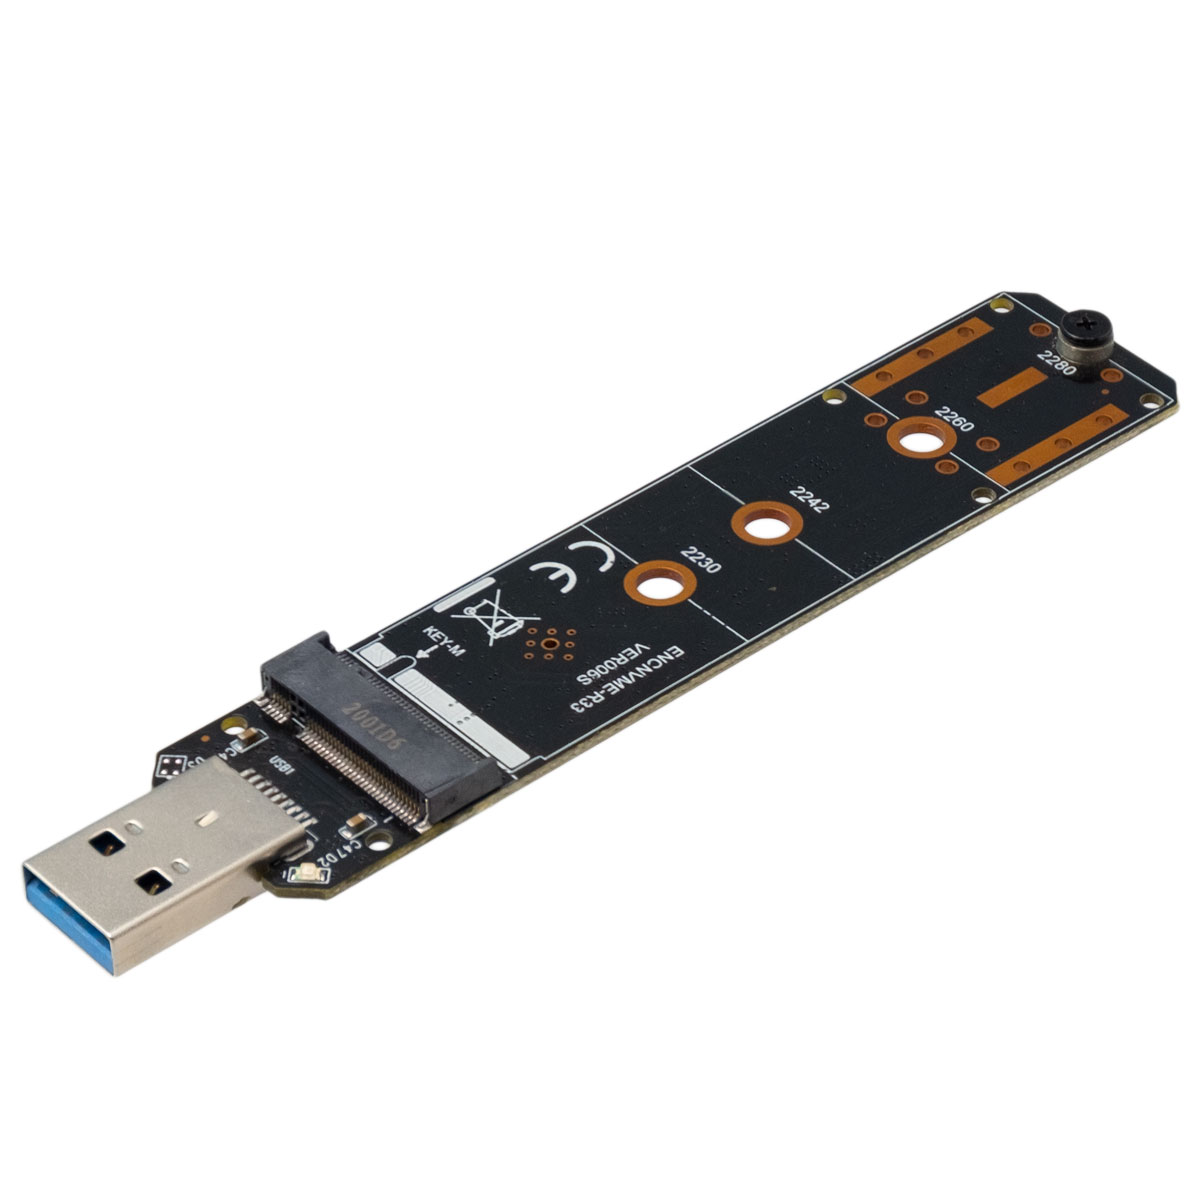 USB 3.0 to NVMe SATA type M adapter